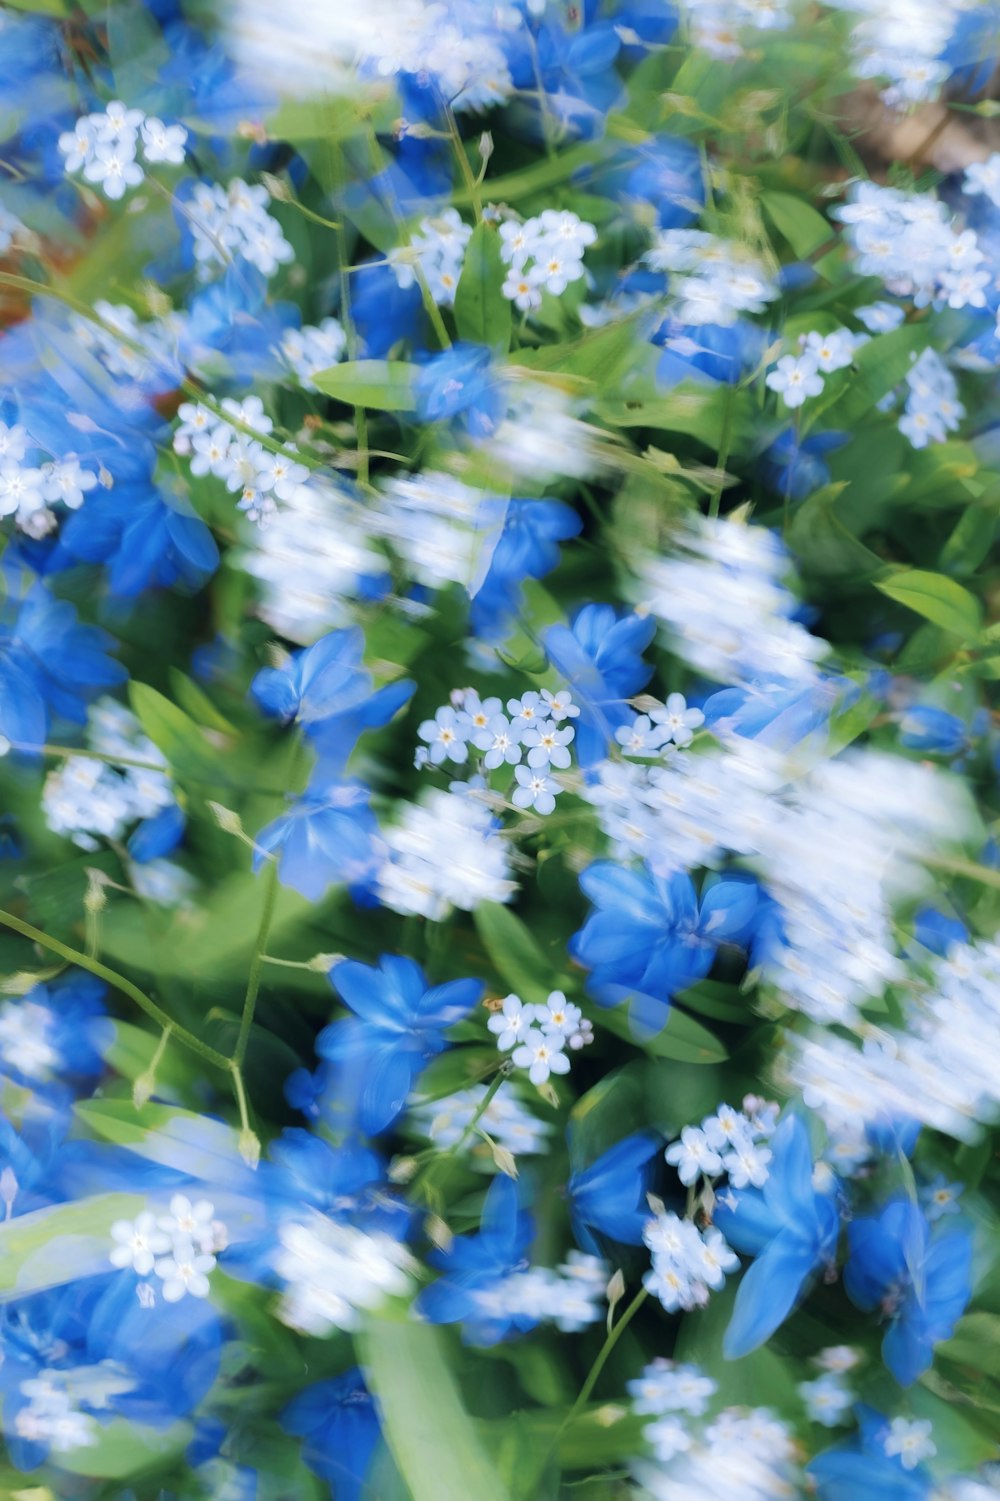 a bunch of blue and white flowers with green leaves